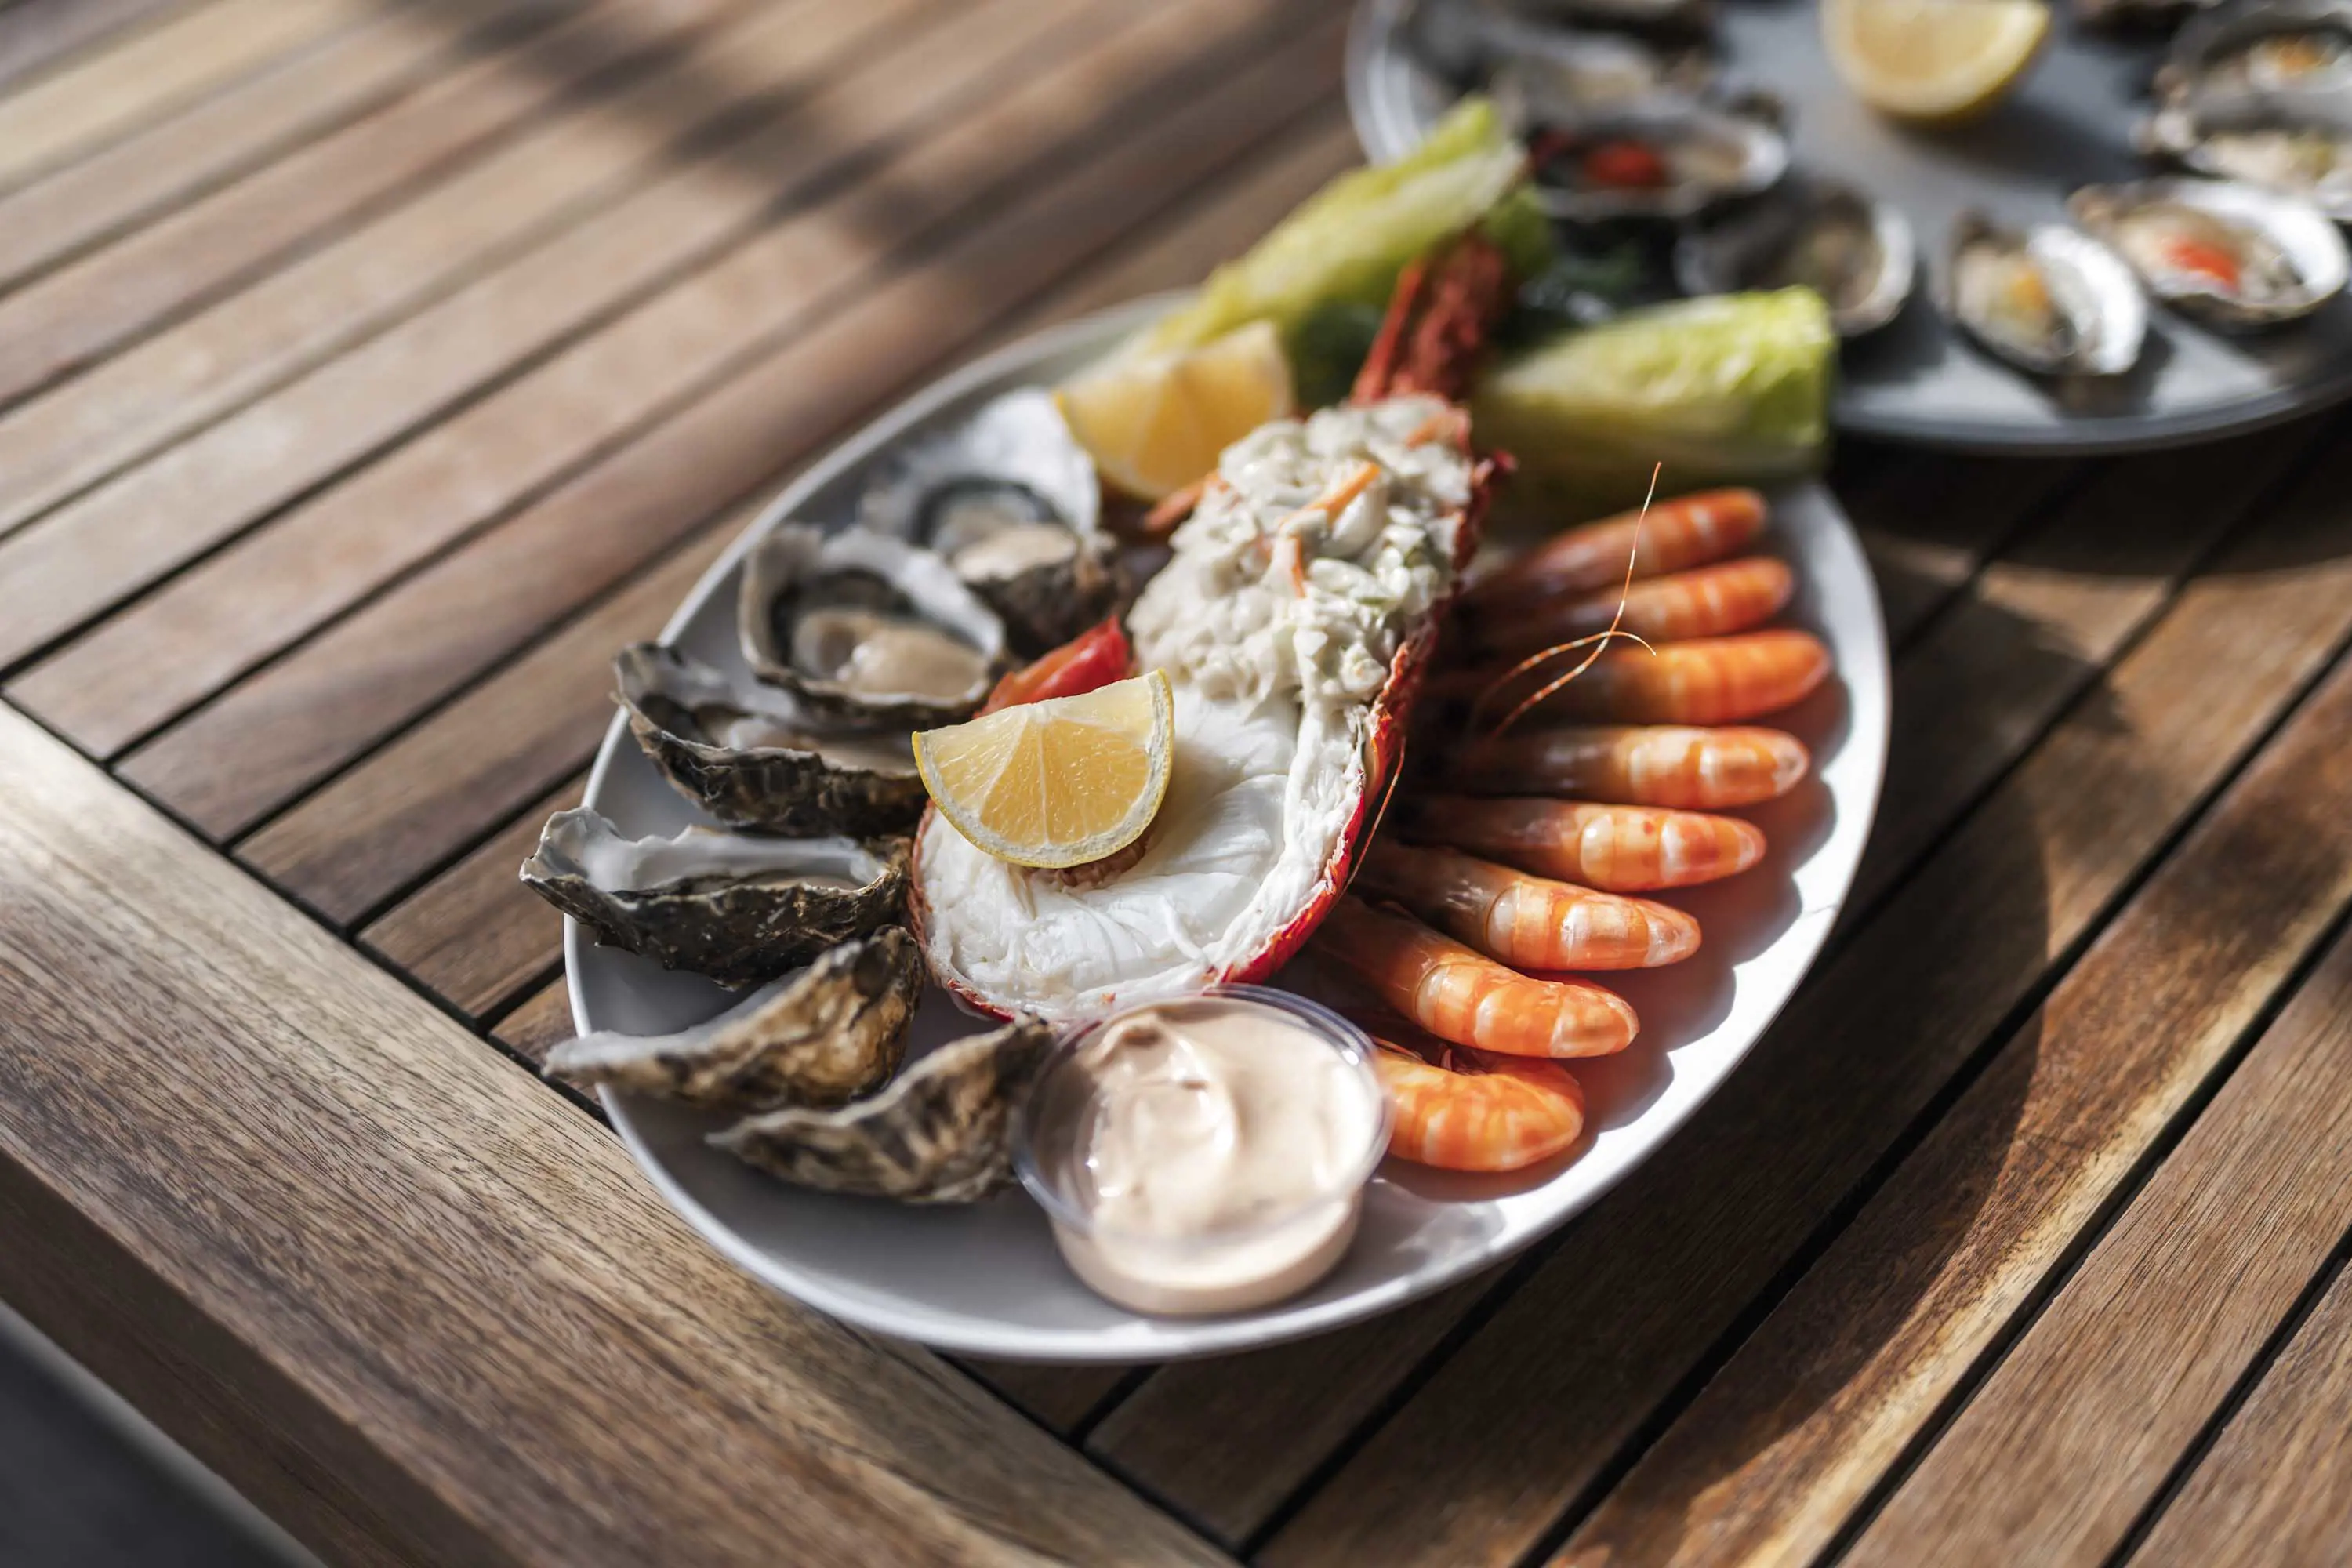 A seafood platter of prawns, oysters, half a crayfish and dips.